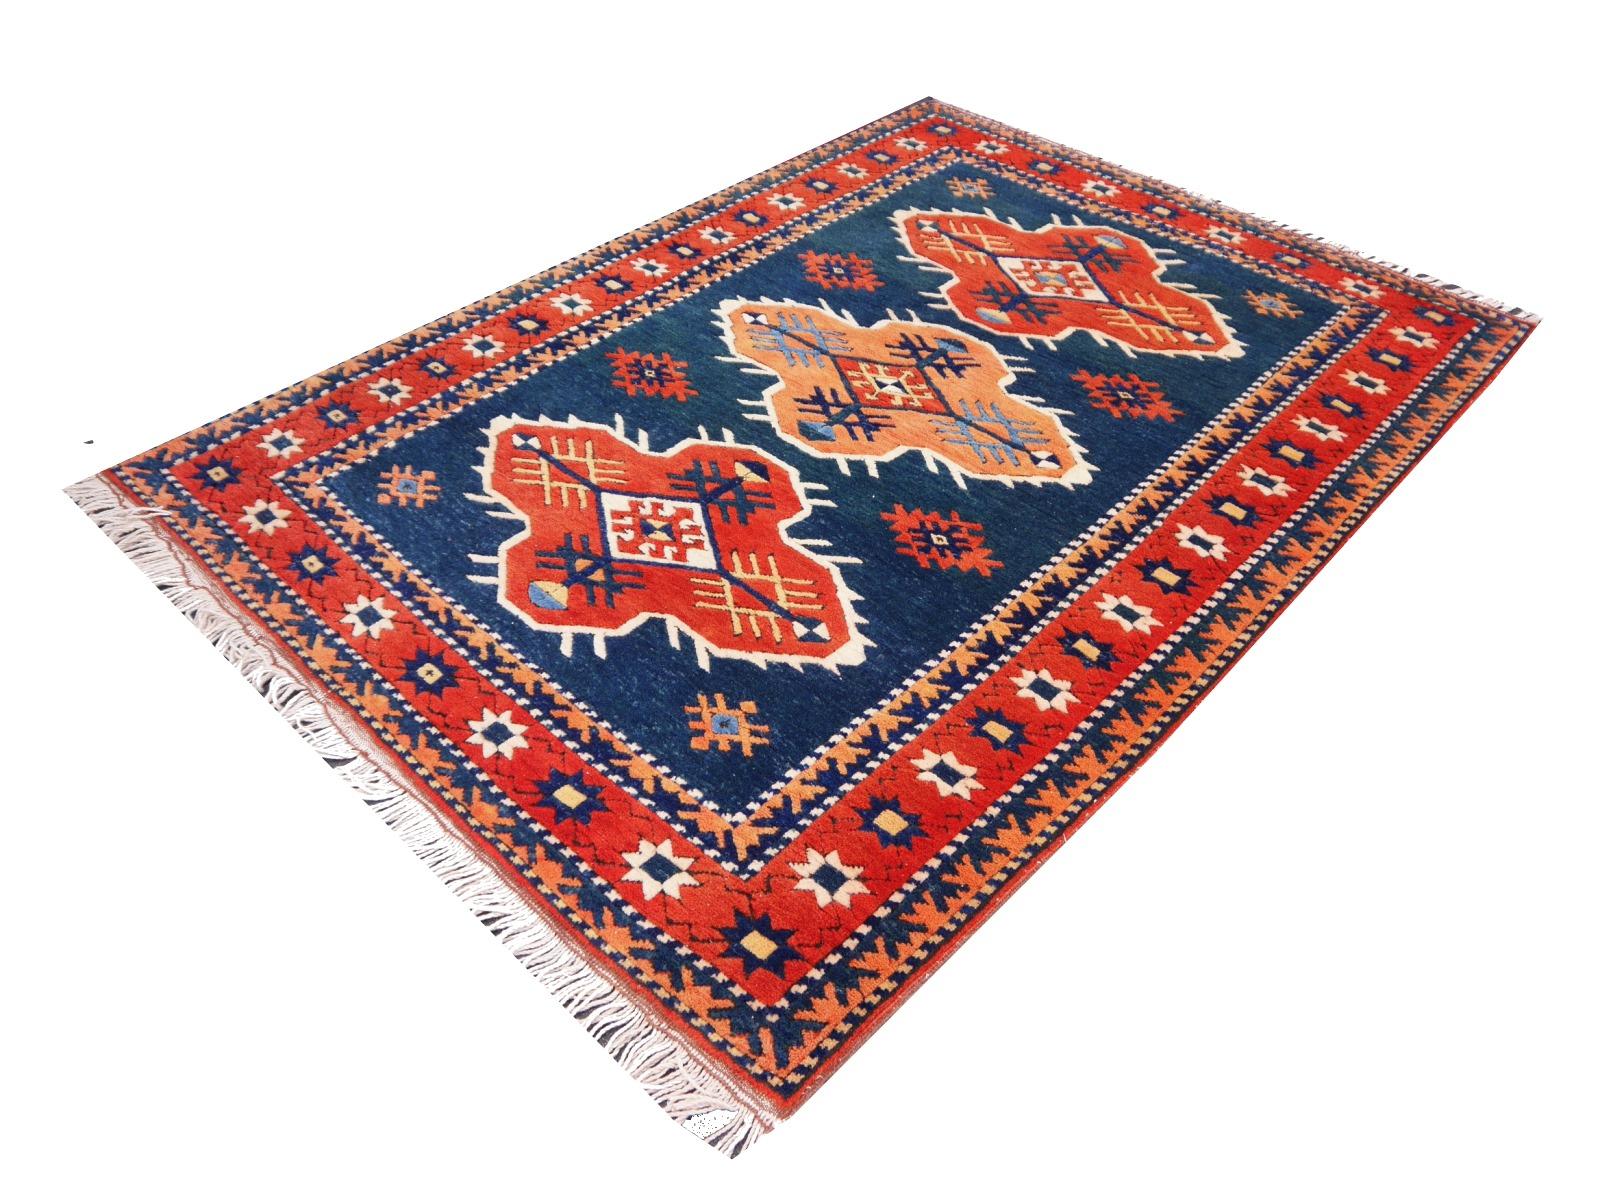 Turkish Azeri Rug Vintage with Caucasian and Heriz Design Djoharian Collection In Good Condition For Sale In Lohr, Bavaria, DE